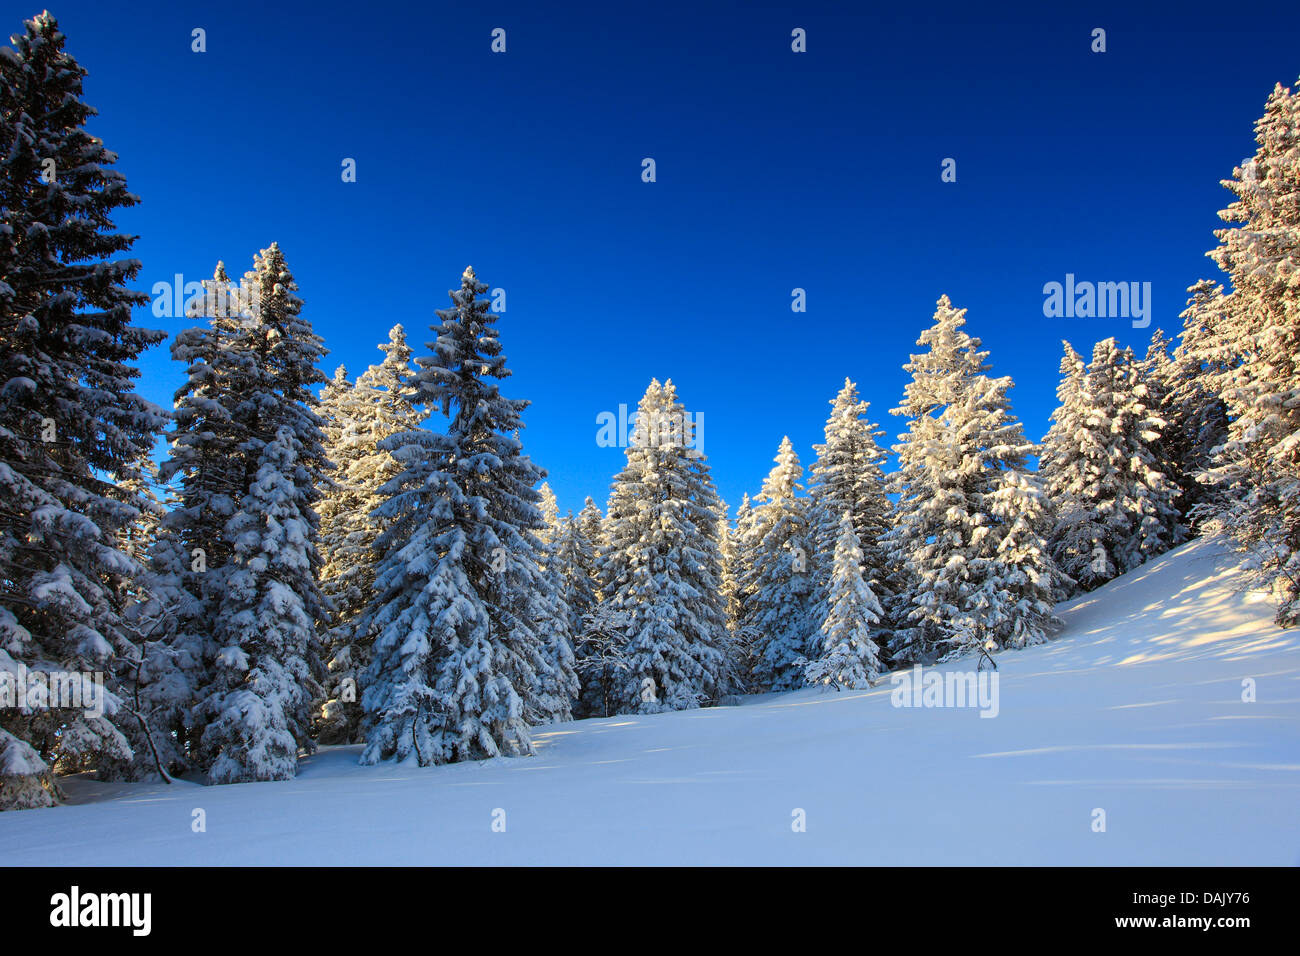 Norway spruce (Picea abies), snowy coniferous forest in sunlight, Switzerland Stock Photo